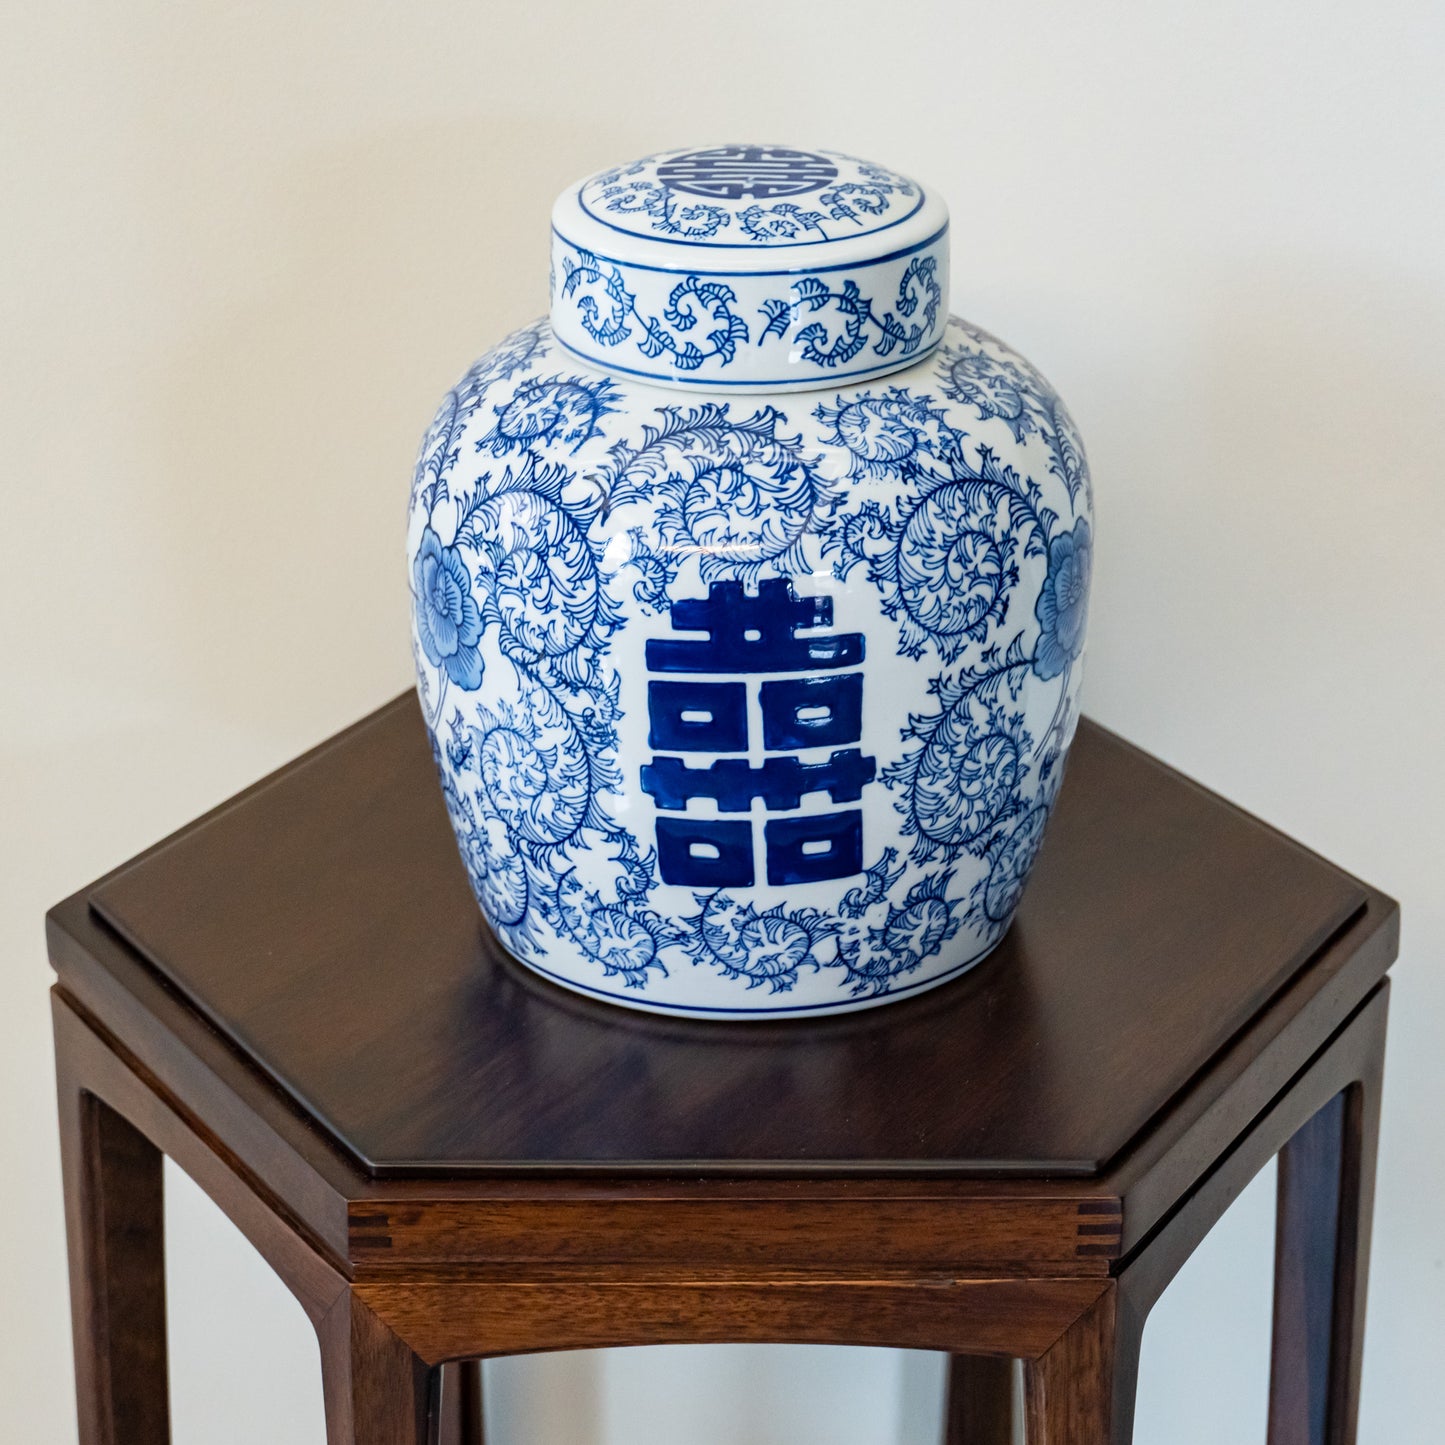 Blue & White Double Happiness Jar with Lid - Large Traditional Chinese Porcelain Vase - Luxurious Home Décor and Collectible